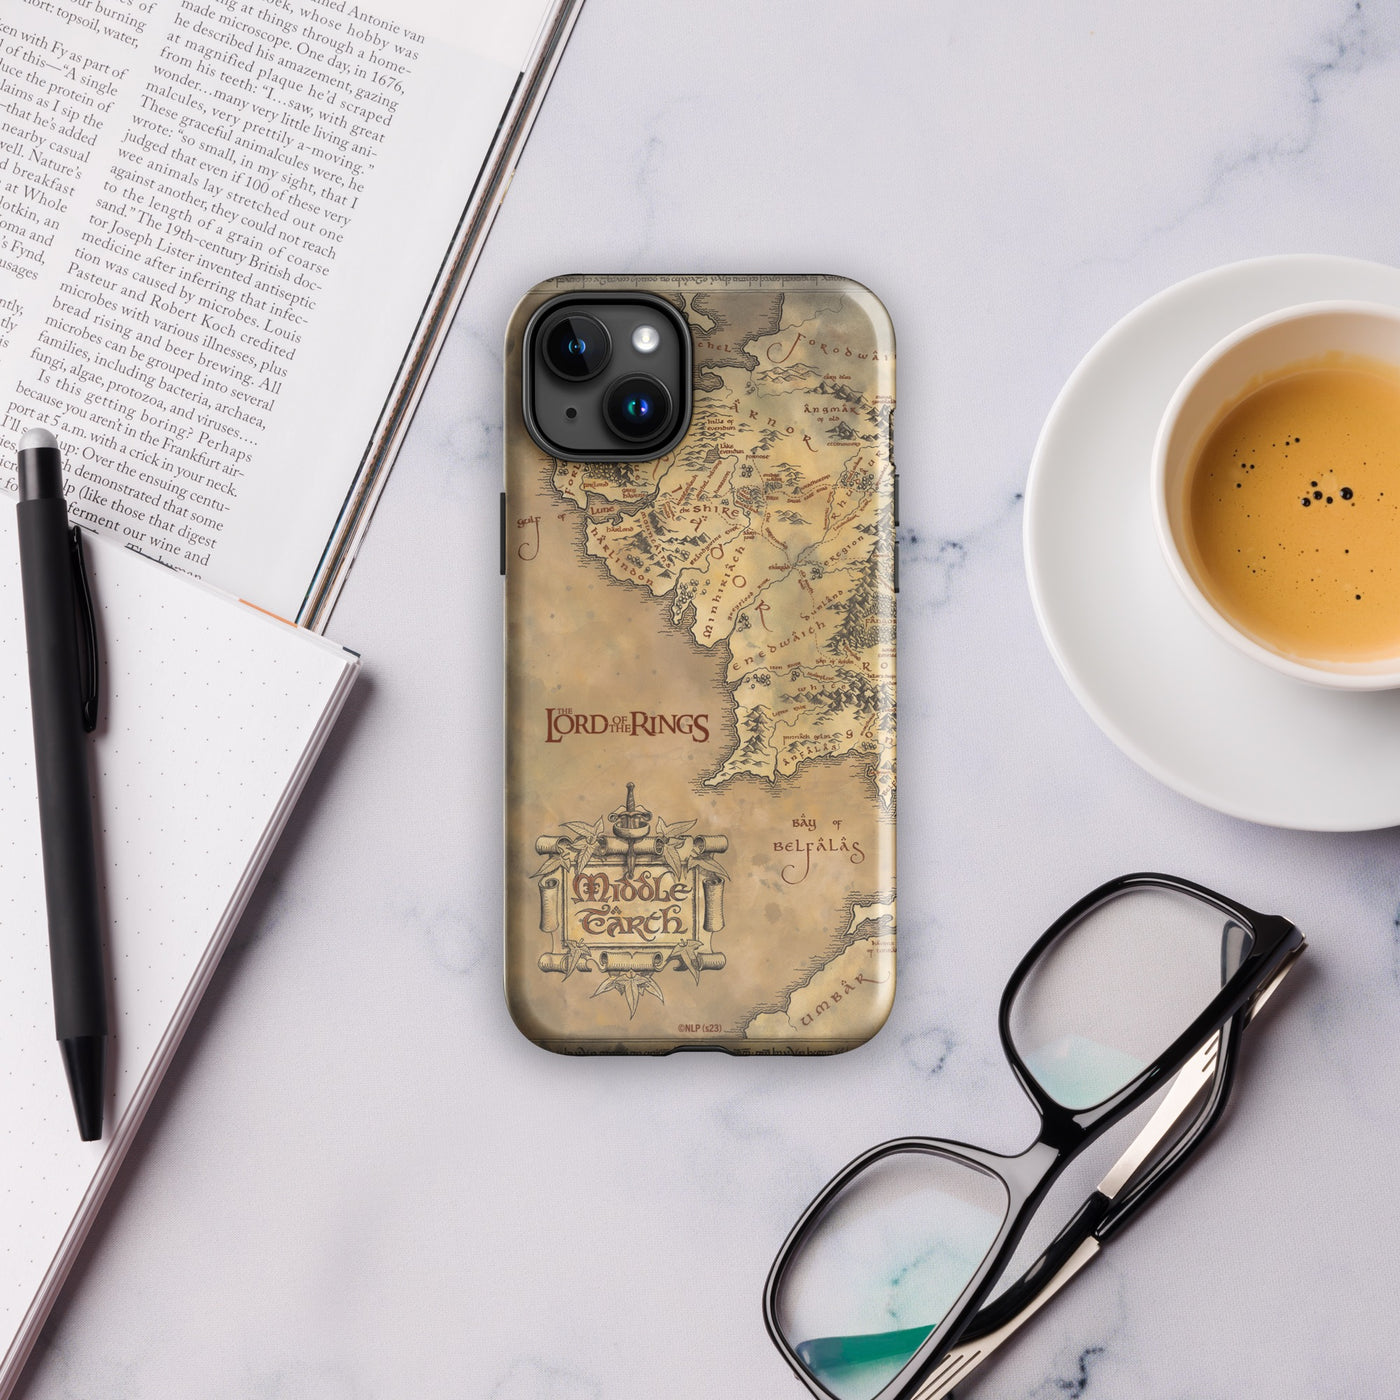 The Lord of the Rings Middle-earth Map Tough Phone Case - iPhone